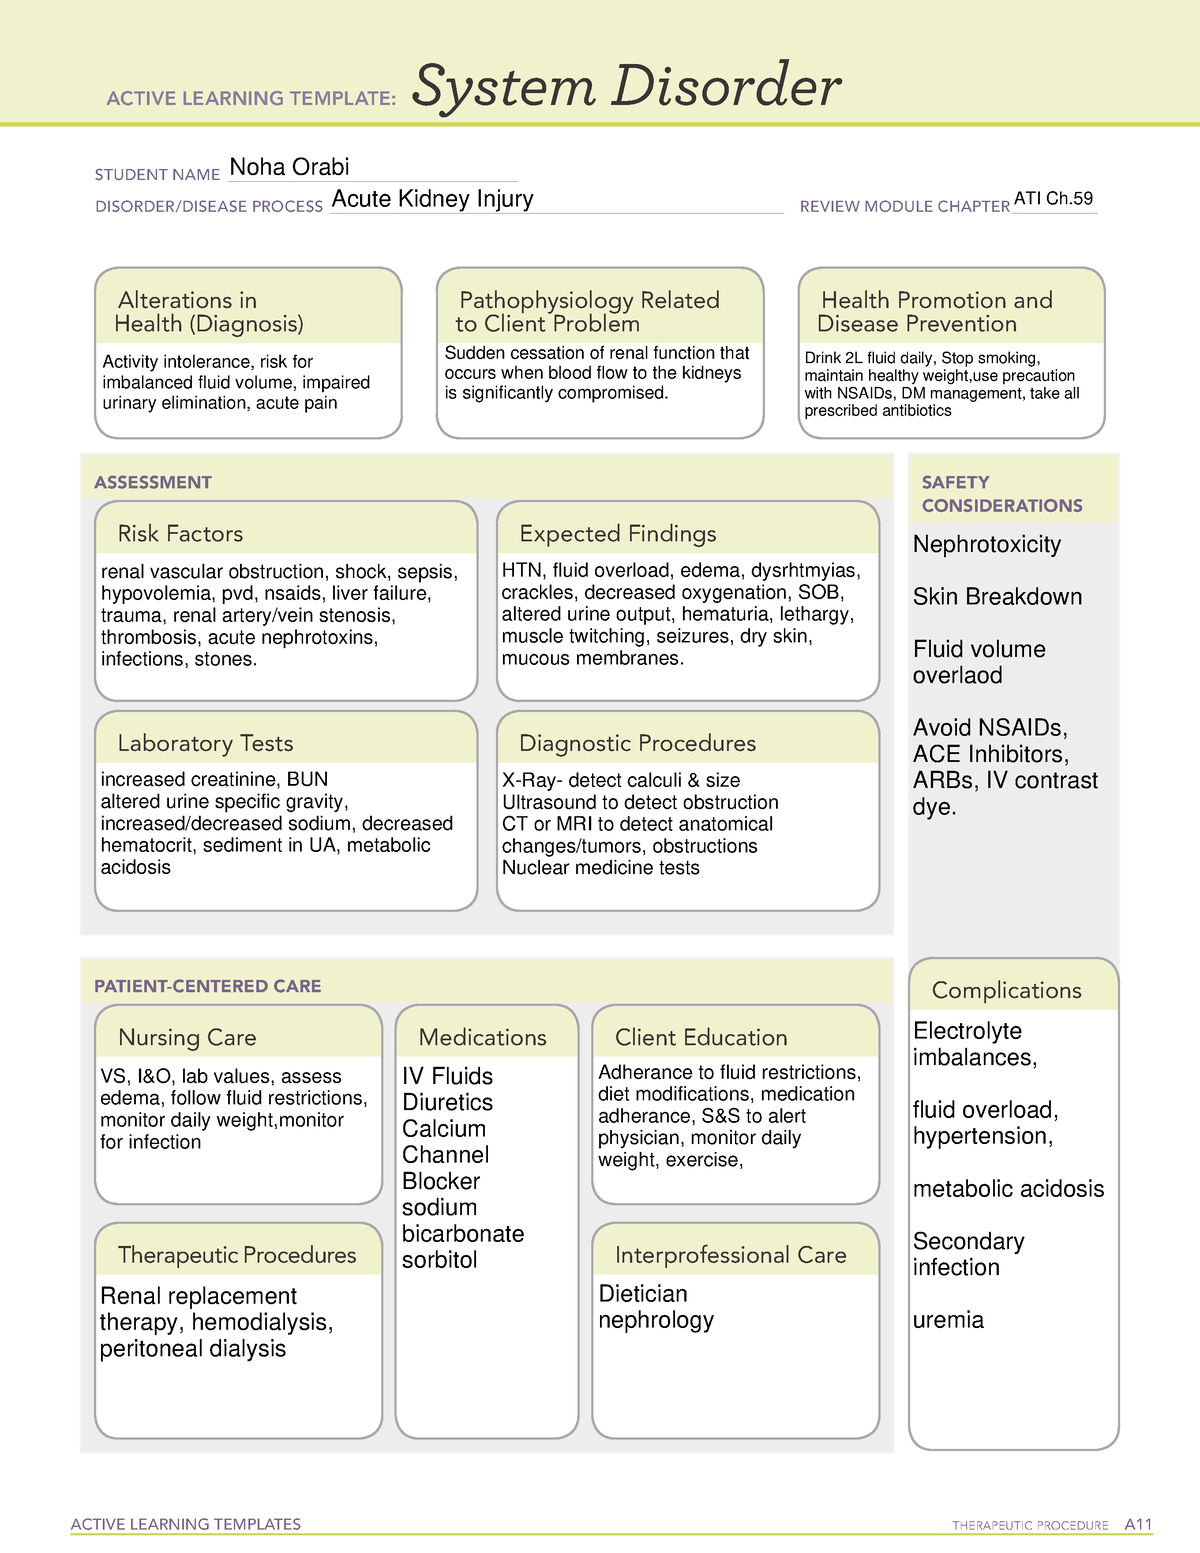 Acute Kidney Injury Template - ACTIVE LEARNING TEMPLATES THERAPEUTIC ...